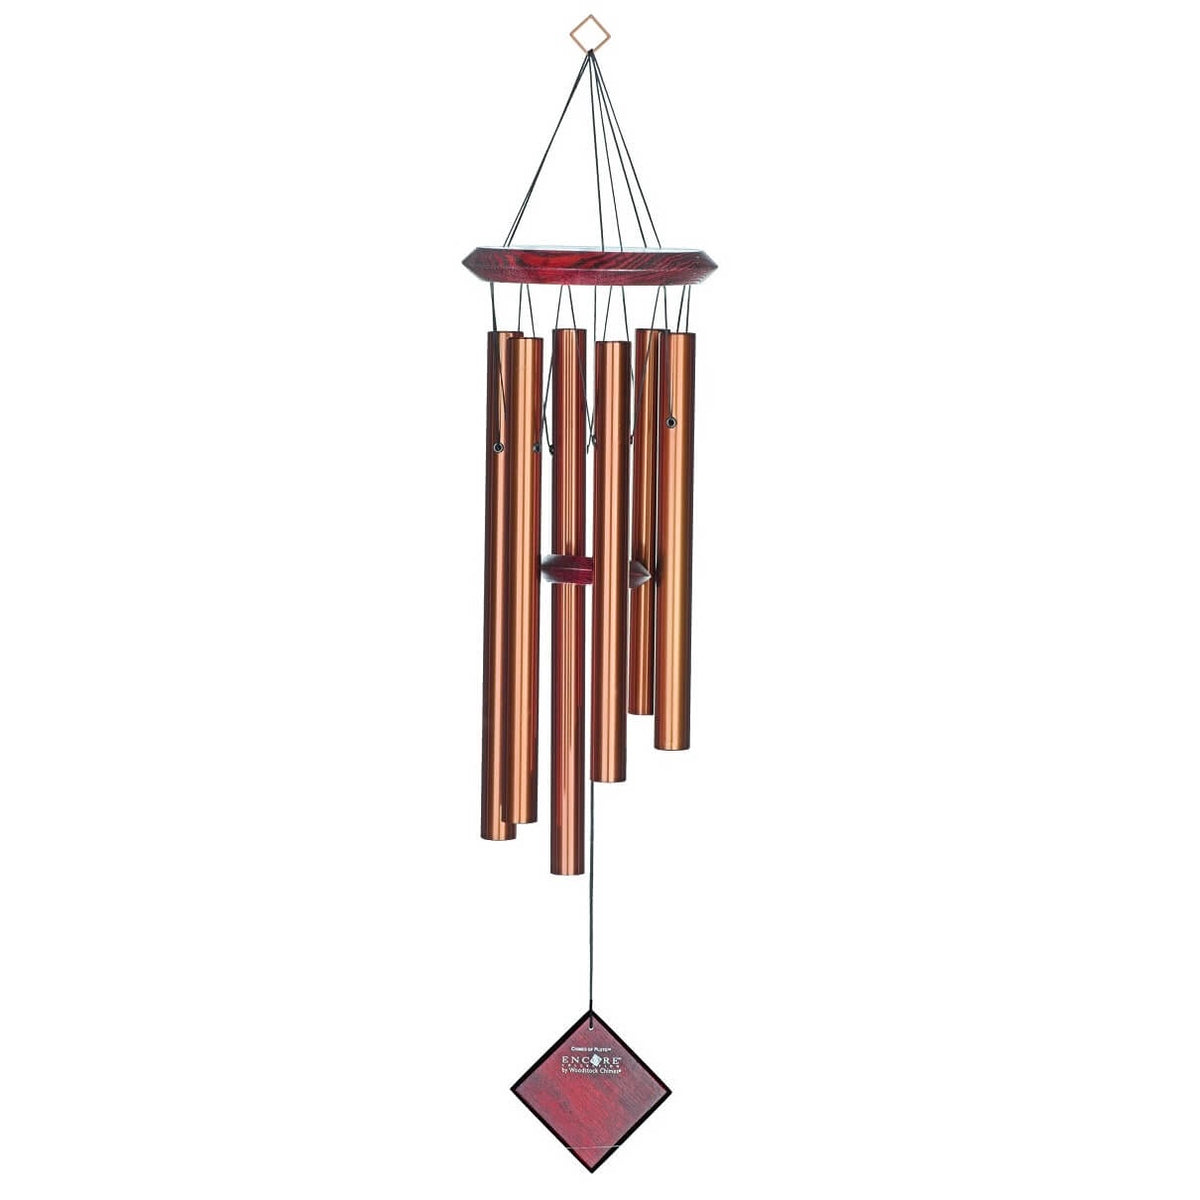 Buy Bronze Woodstock Chimes of Pluto at Under the Sun Southend stockist shop